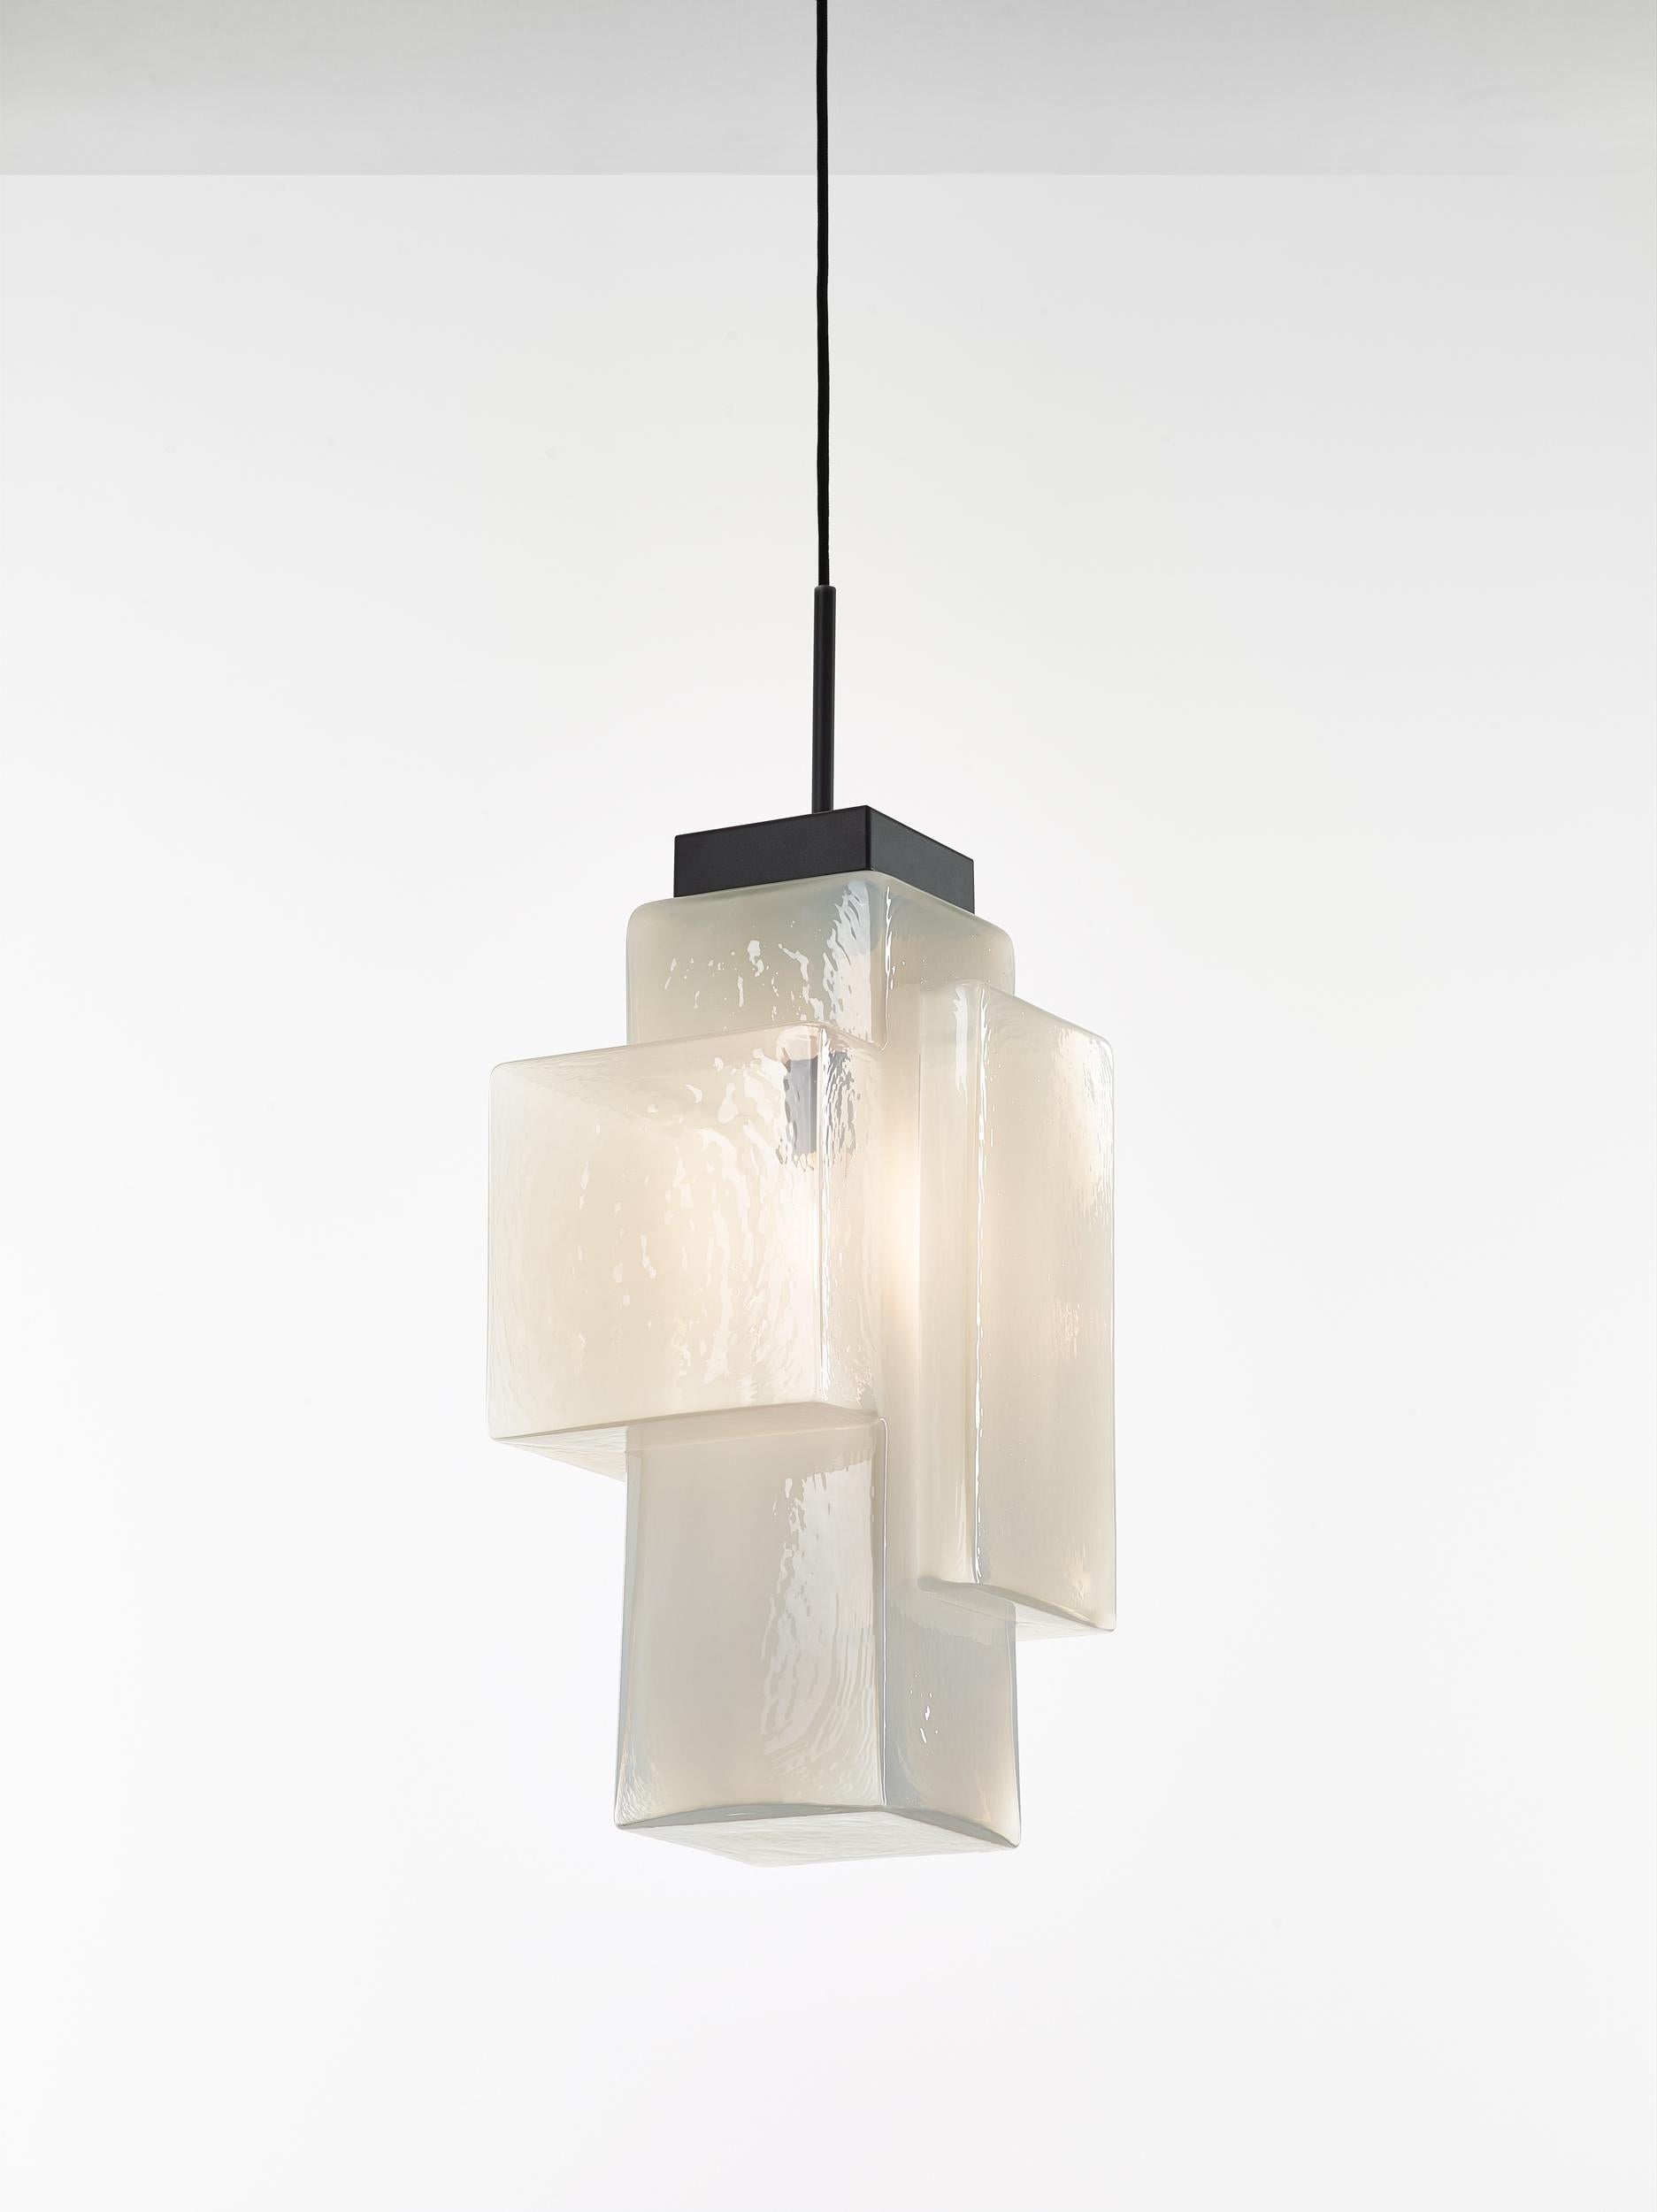 Alabaster white tetris pendant light by Dechem Studio
Dimensions: W 30 x D 23 x H 200 cm
Materials: metal, glass.
Also available: different colors available.
In this complex lighting fixture, strict geometric and architectural lines contrast with